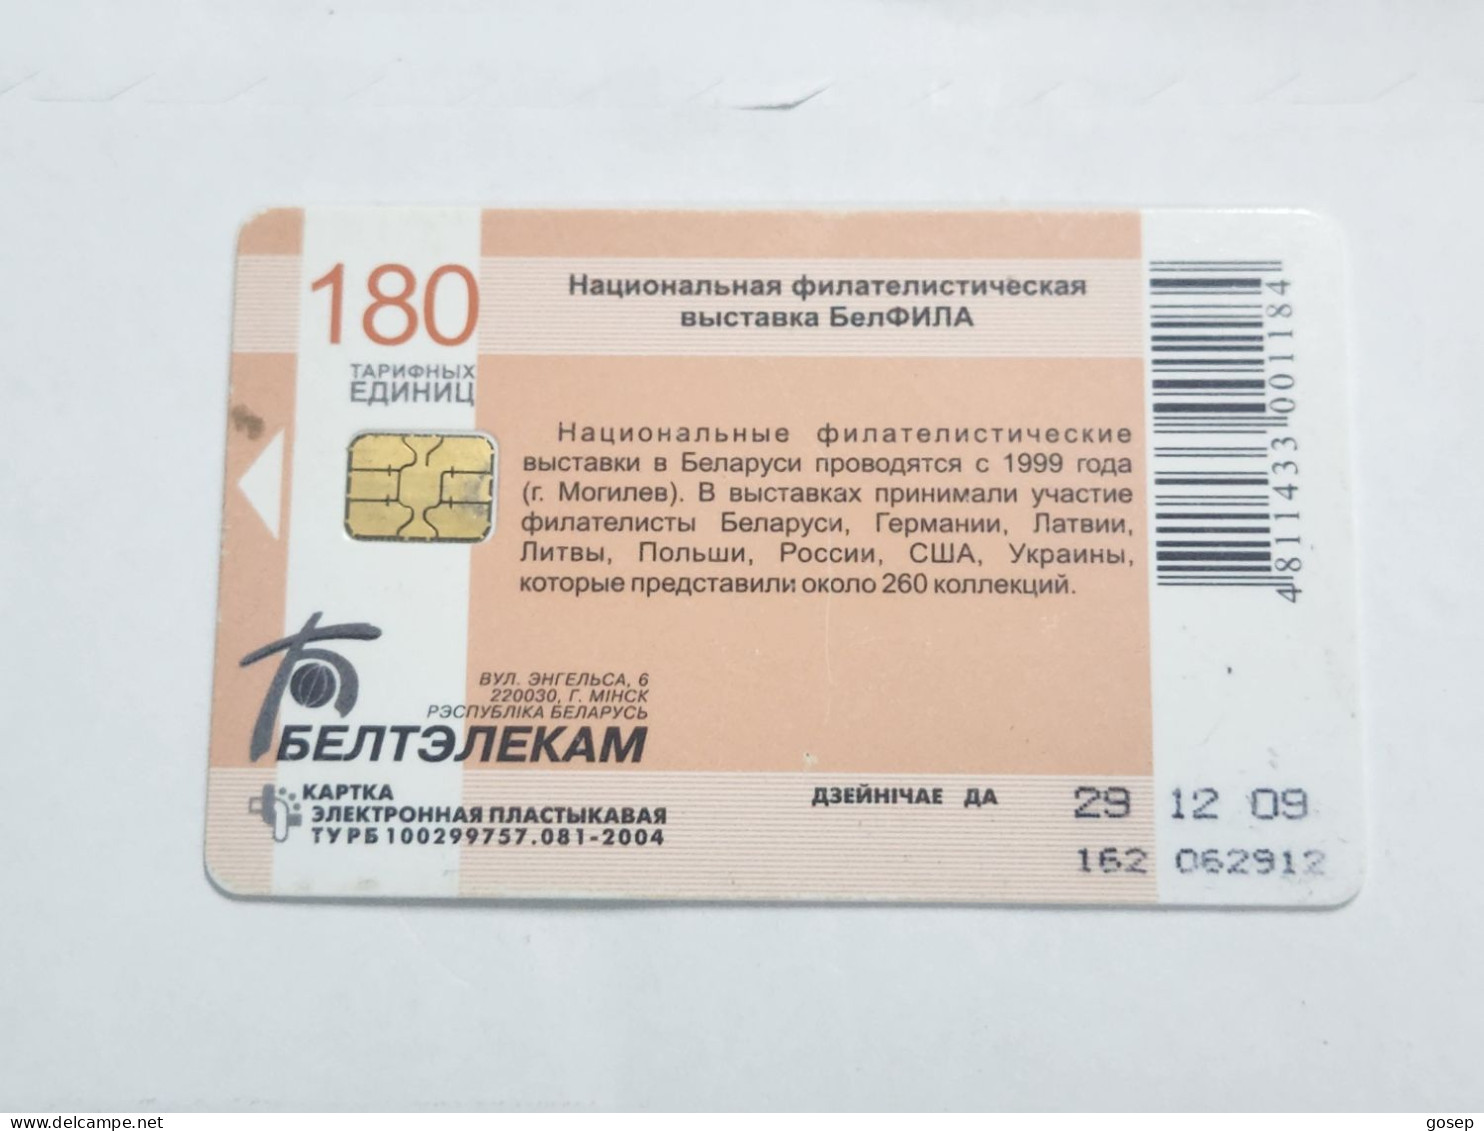 BELARUS-(BY-BLT-162)-National Philatelic Fair-(139)(GOLD CHIP)(062912)(tirage-130.000)-used Card+1card Prepiad Free - Bielorussia